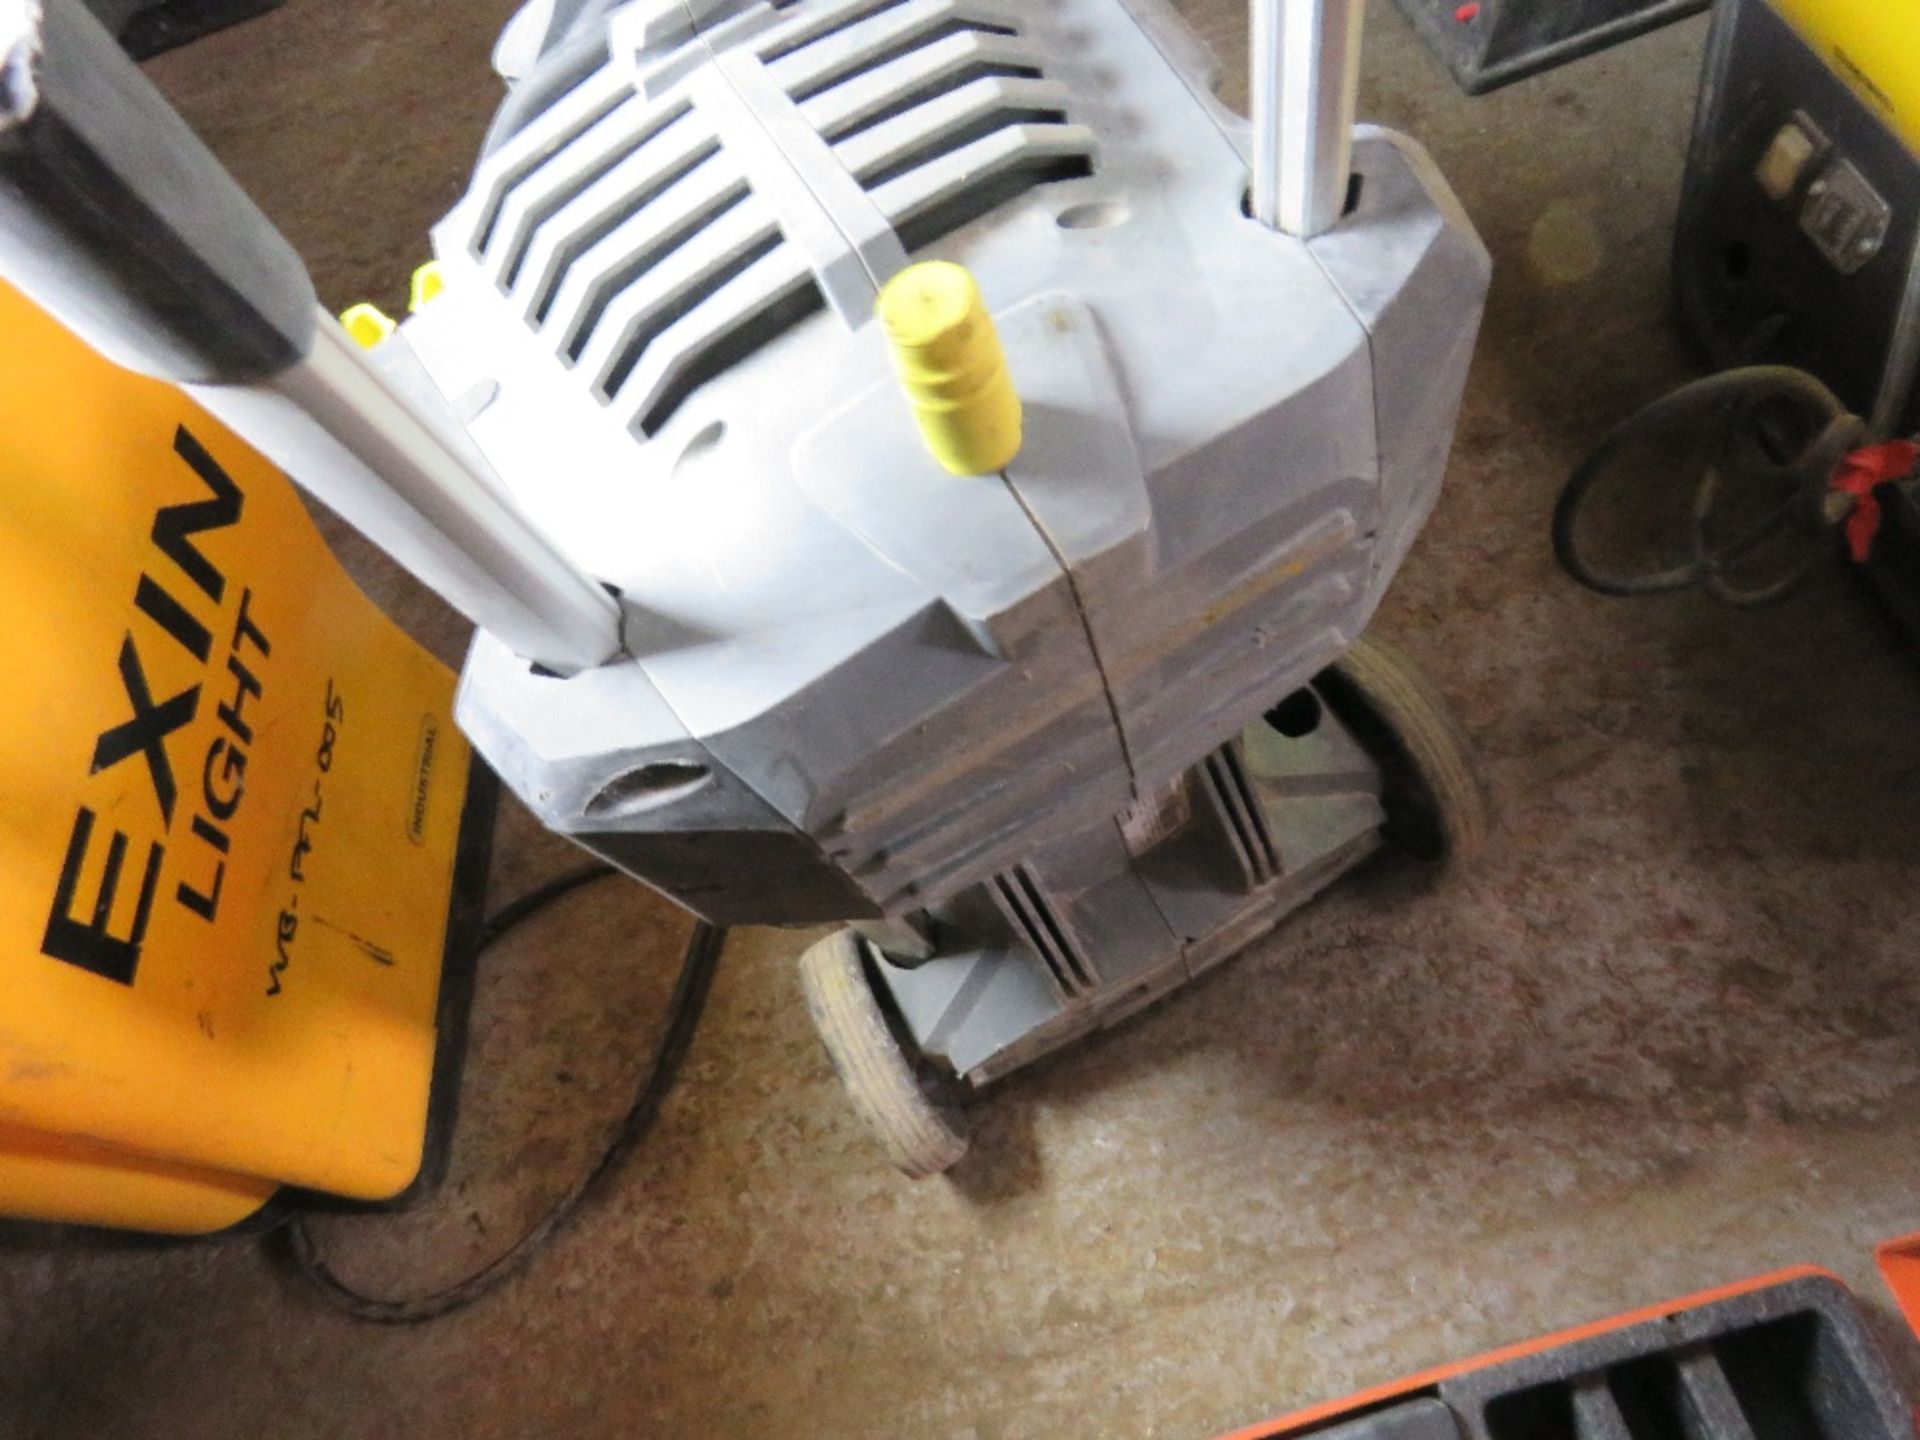 KARCHER 110VOLT PRESSURE WASHER. UNTESTED, CONDITION UNKNOWN. - Image 2 of 2